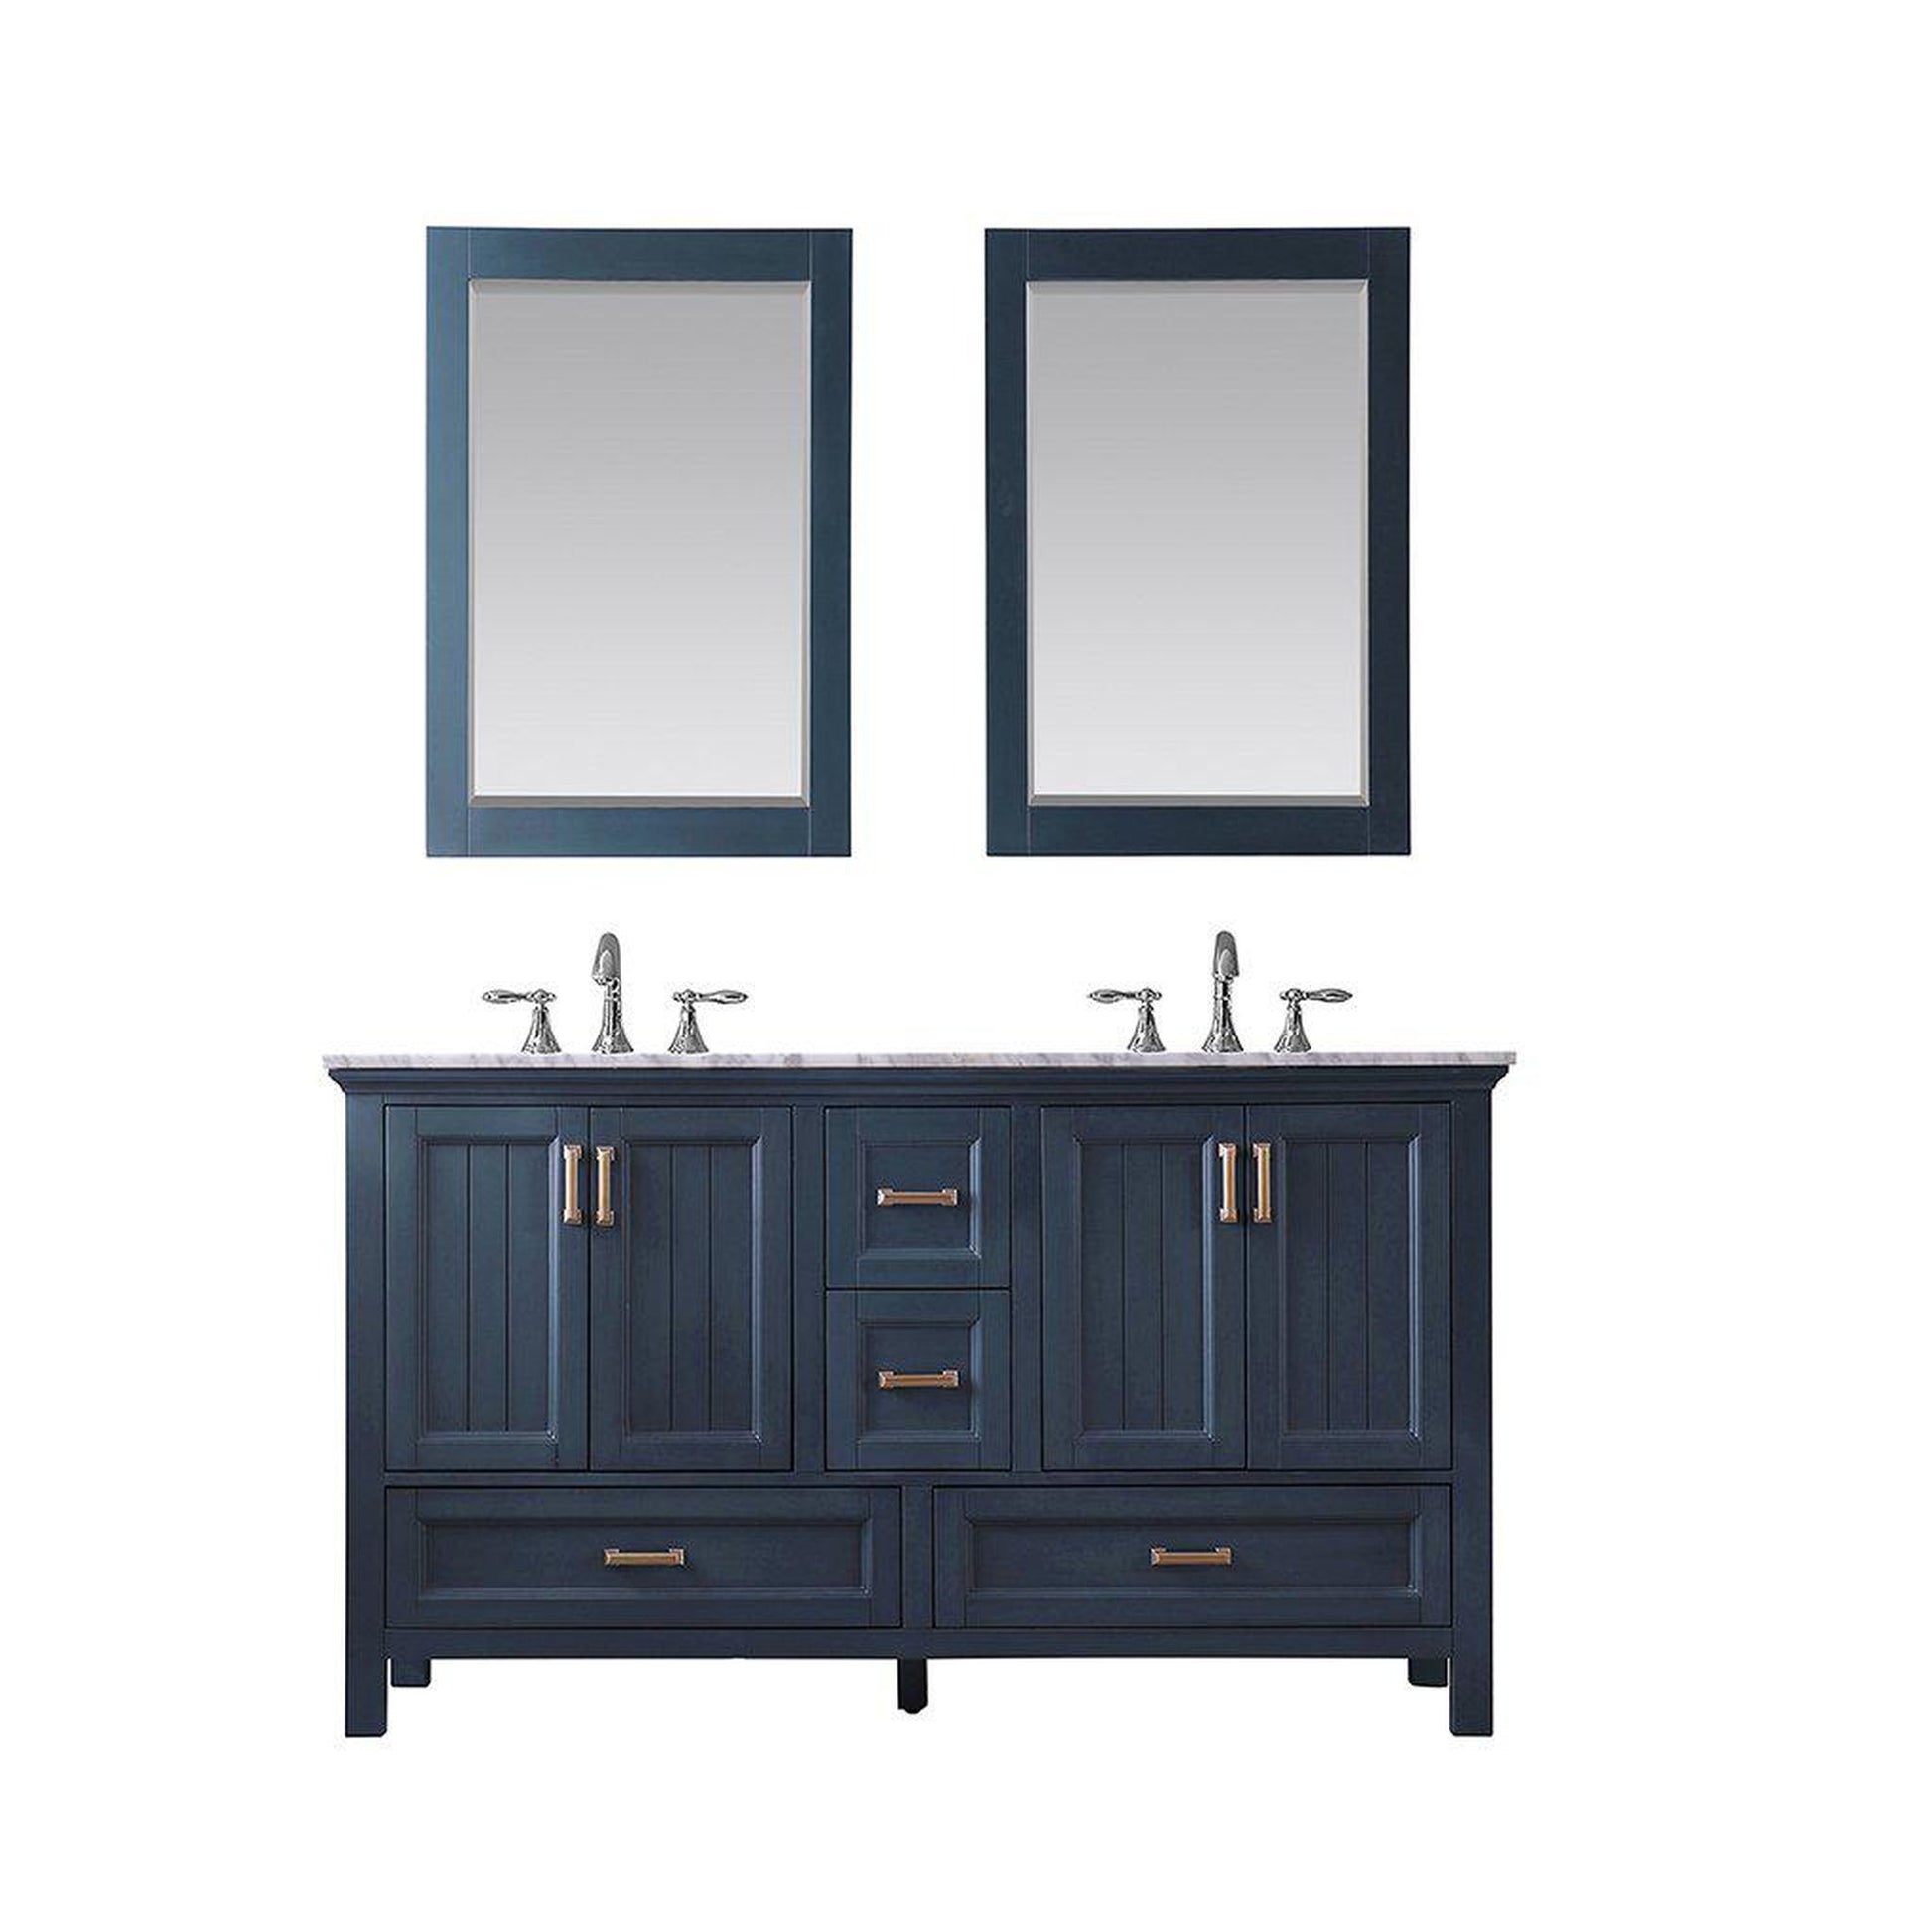 Altair Isla 60" Double Classic Blue Freestanding Bathroom Vanity Set With Mirror, Natural Carrara White Marble Top, Two Rectangular Undermount Ceramic Sinks, and Overflow